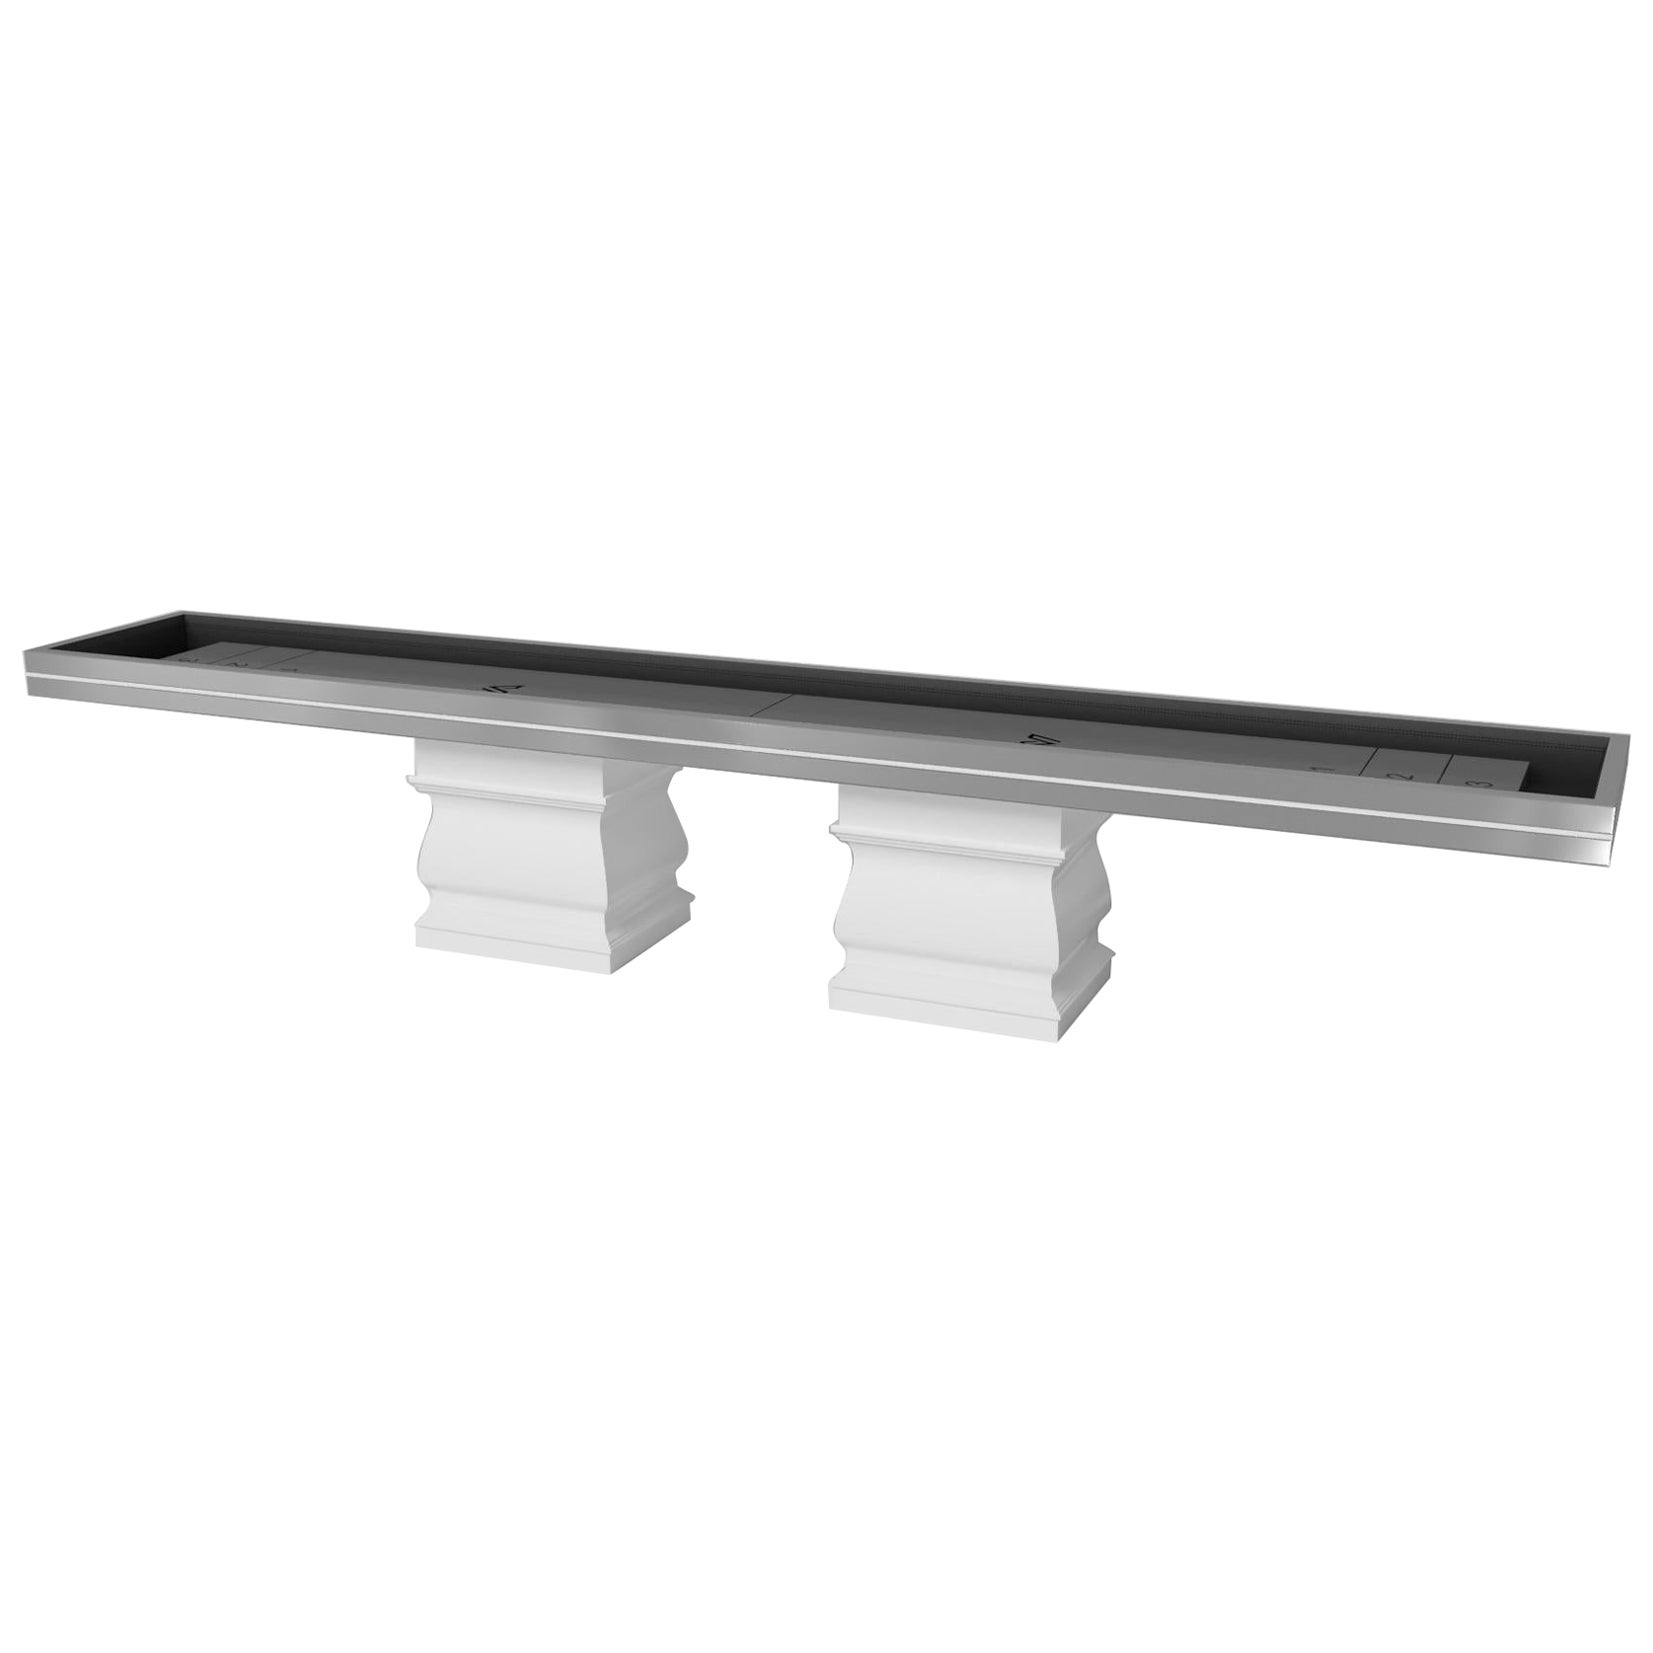 Elevate Customs Baluster Shuffleboard / Stainless Steel Sheet Metal in 12' - USA For Sale